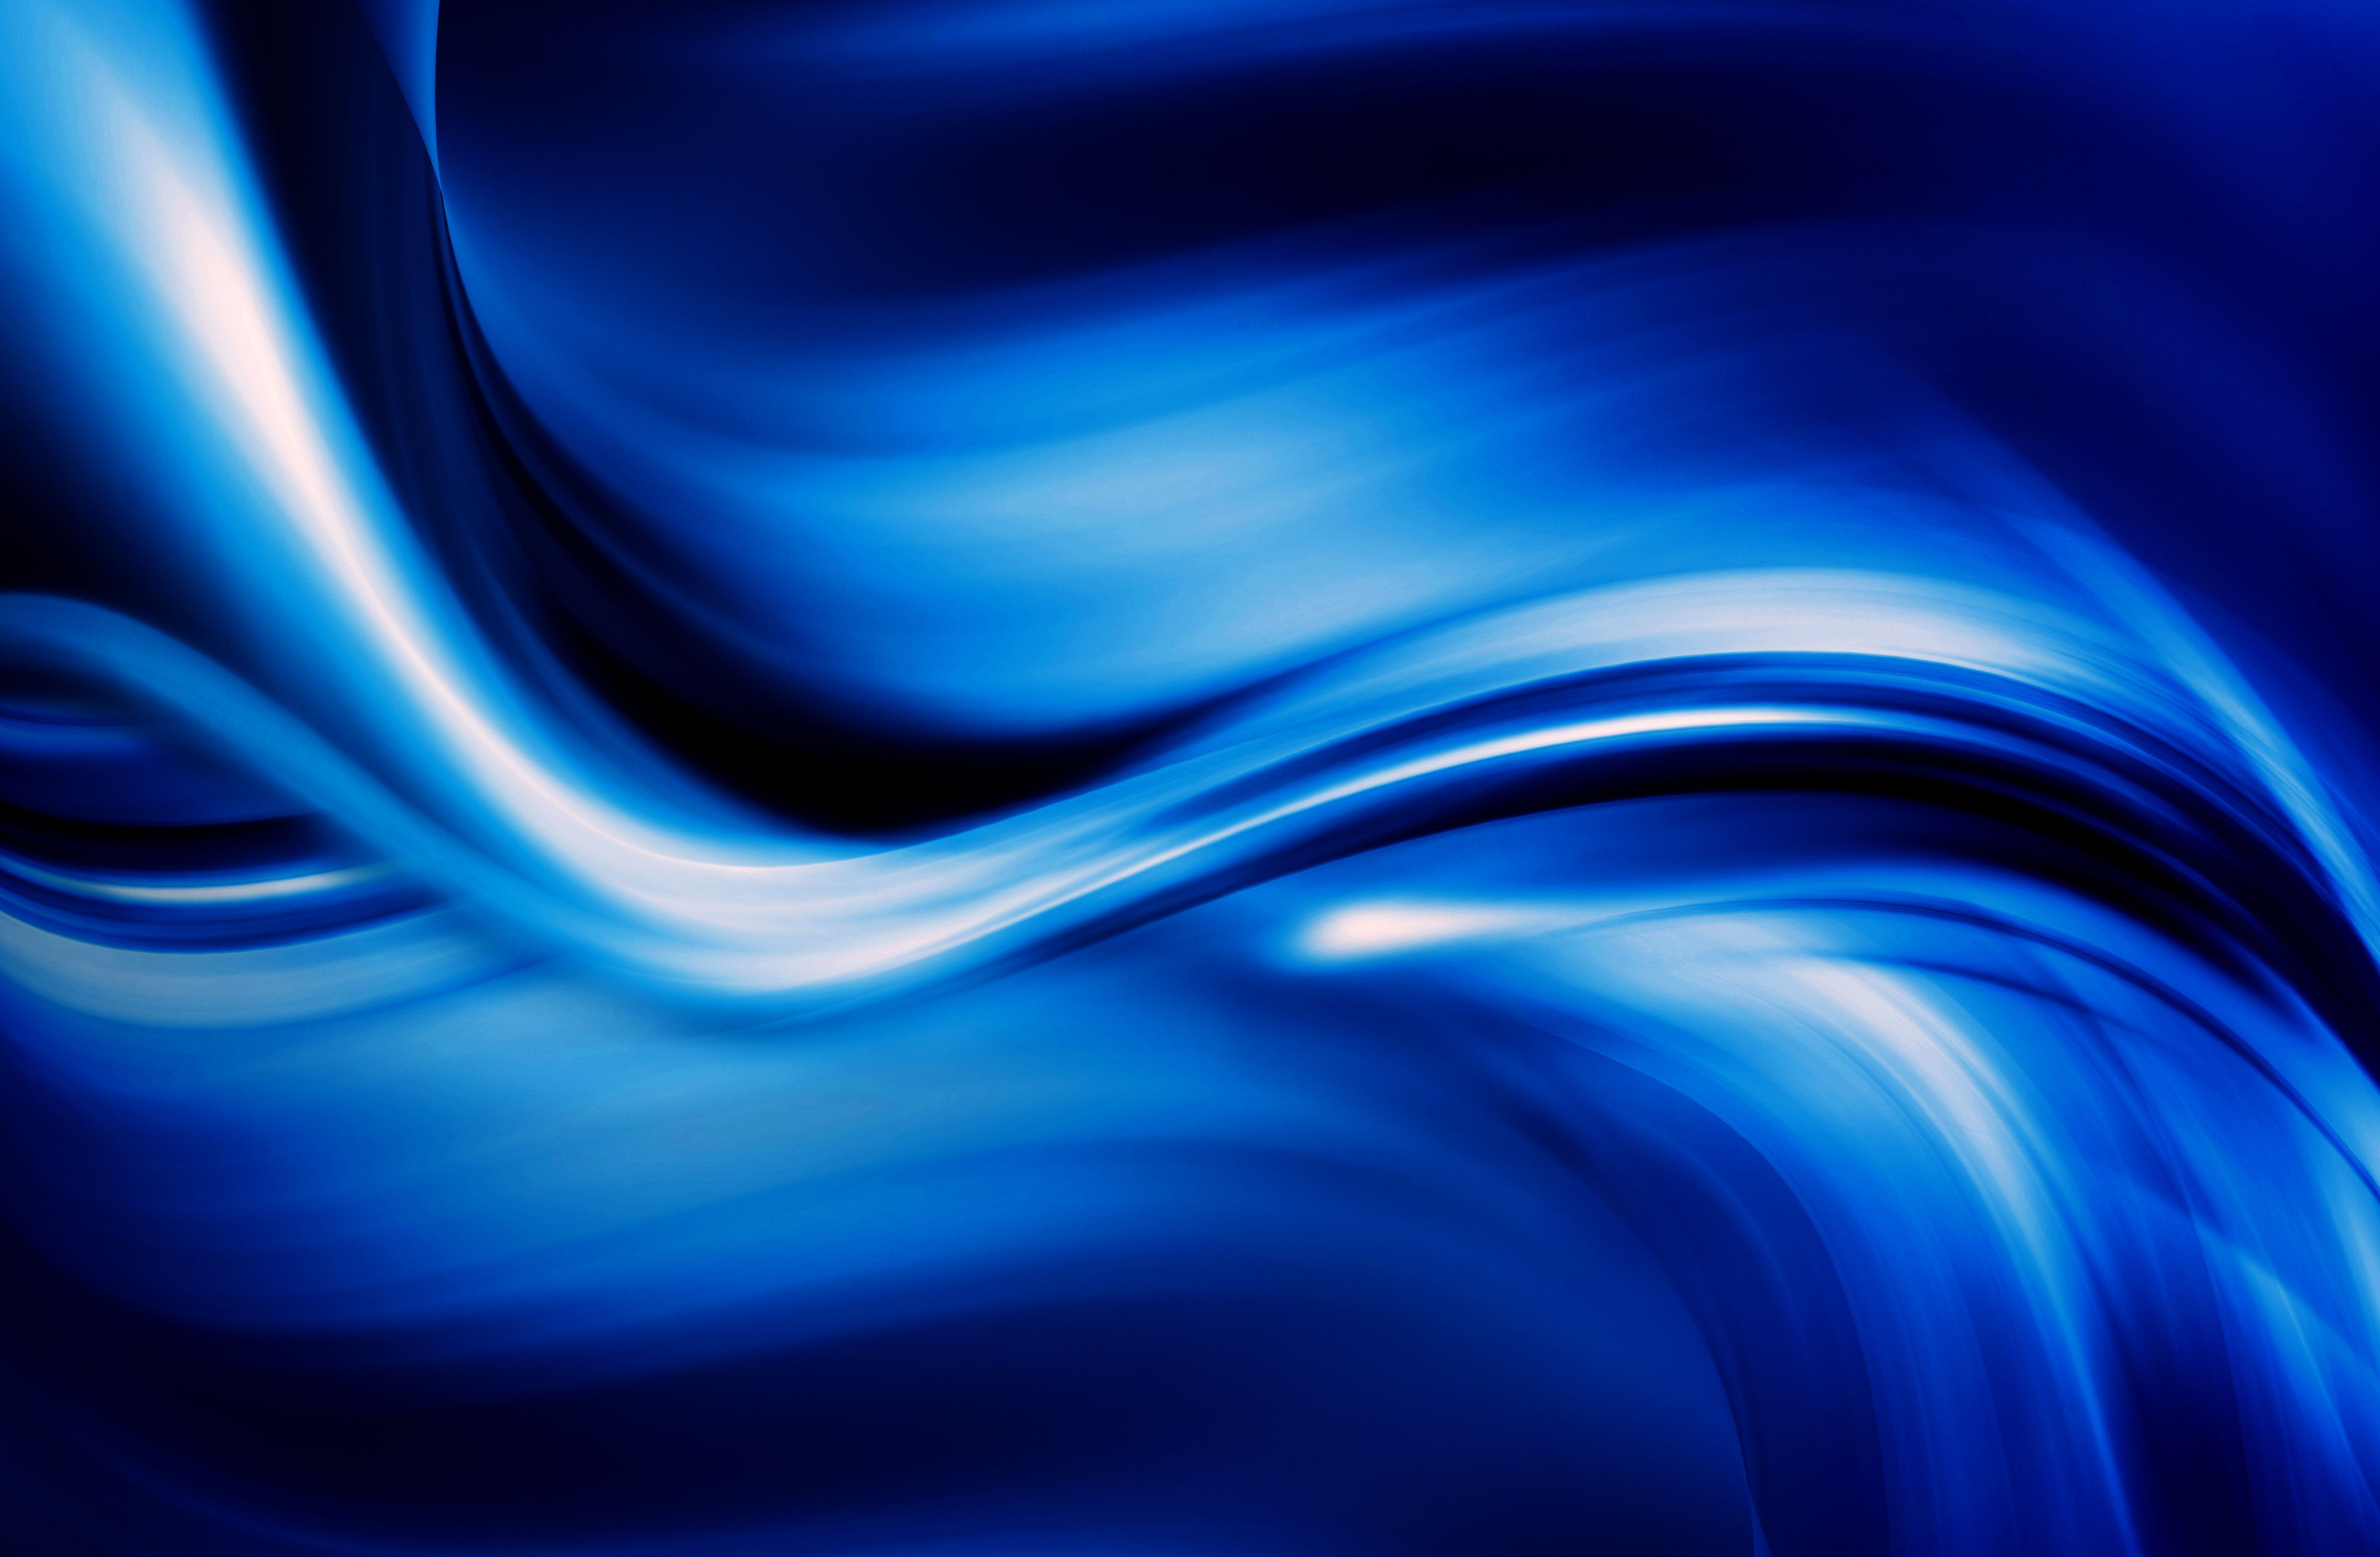 Another dark blue abstract background texture image